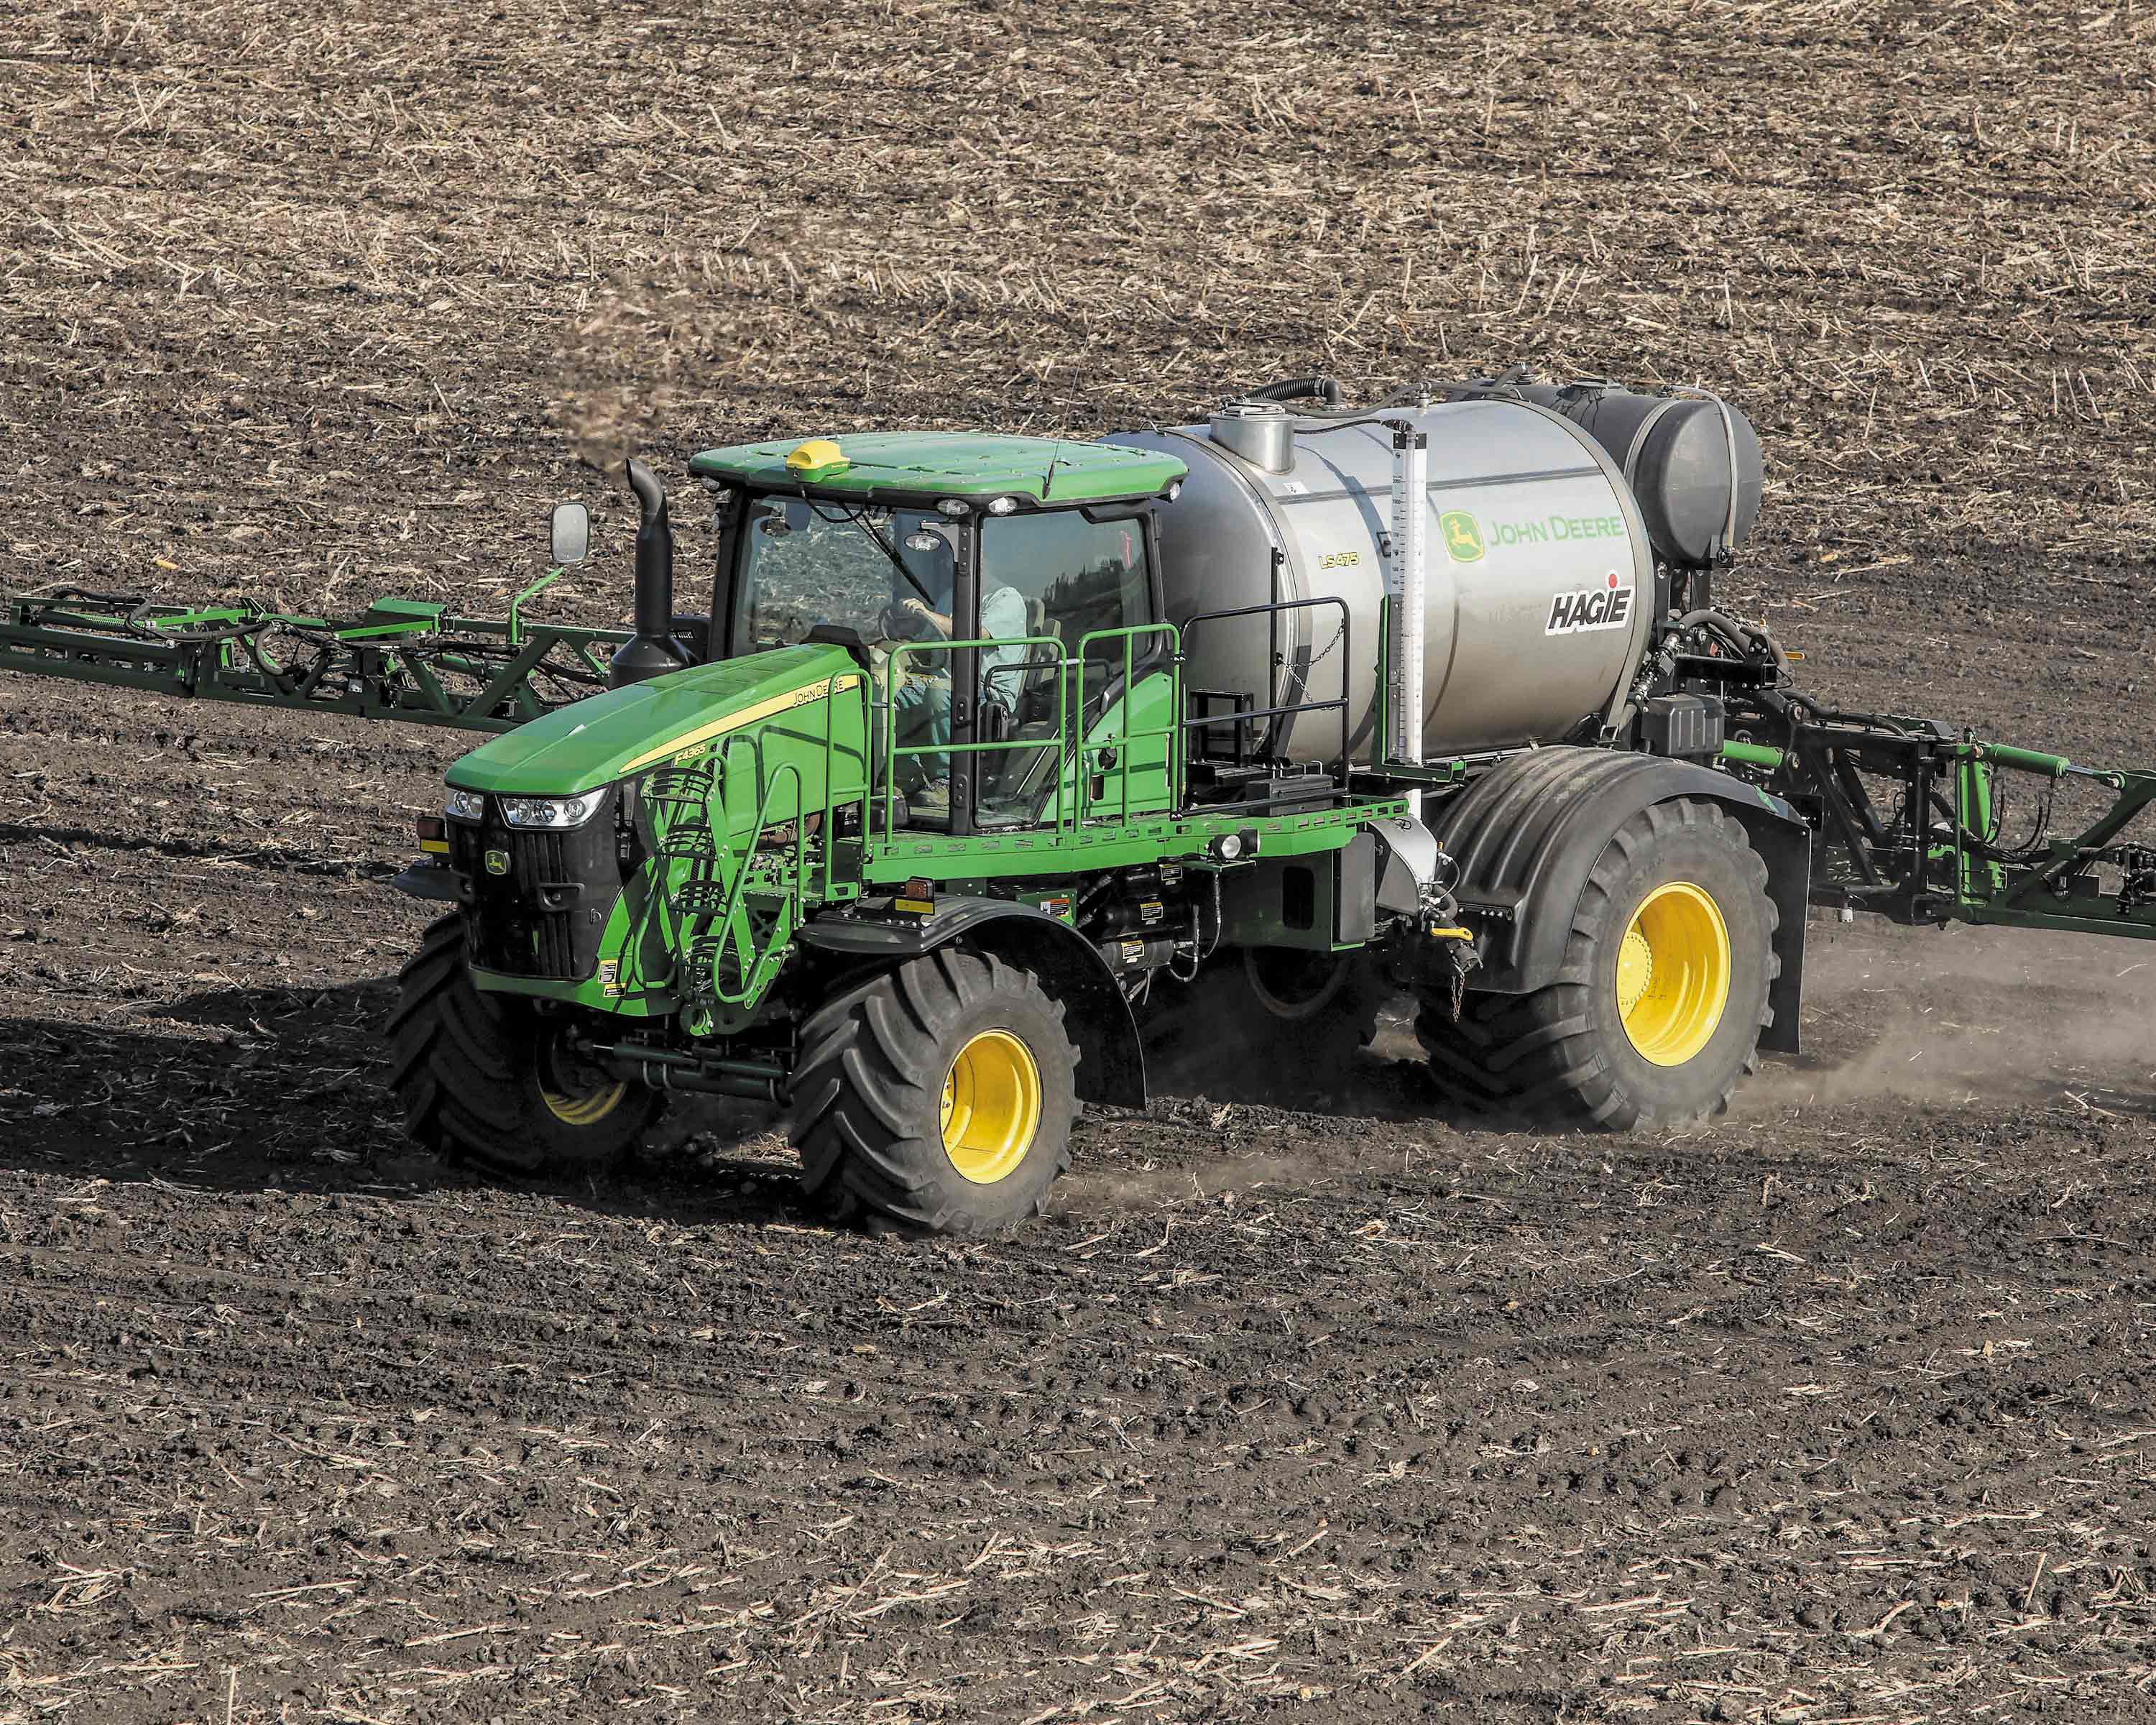 The LS475 Liquid System option for its F4365 High-Capacity Nutrient Applicator features a large 2,000-gallon tank.